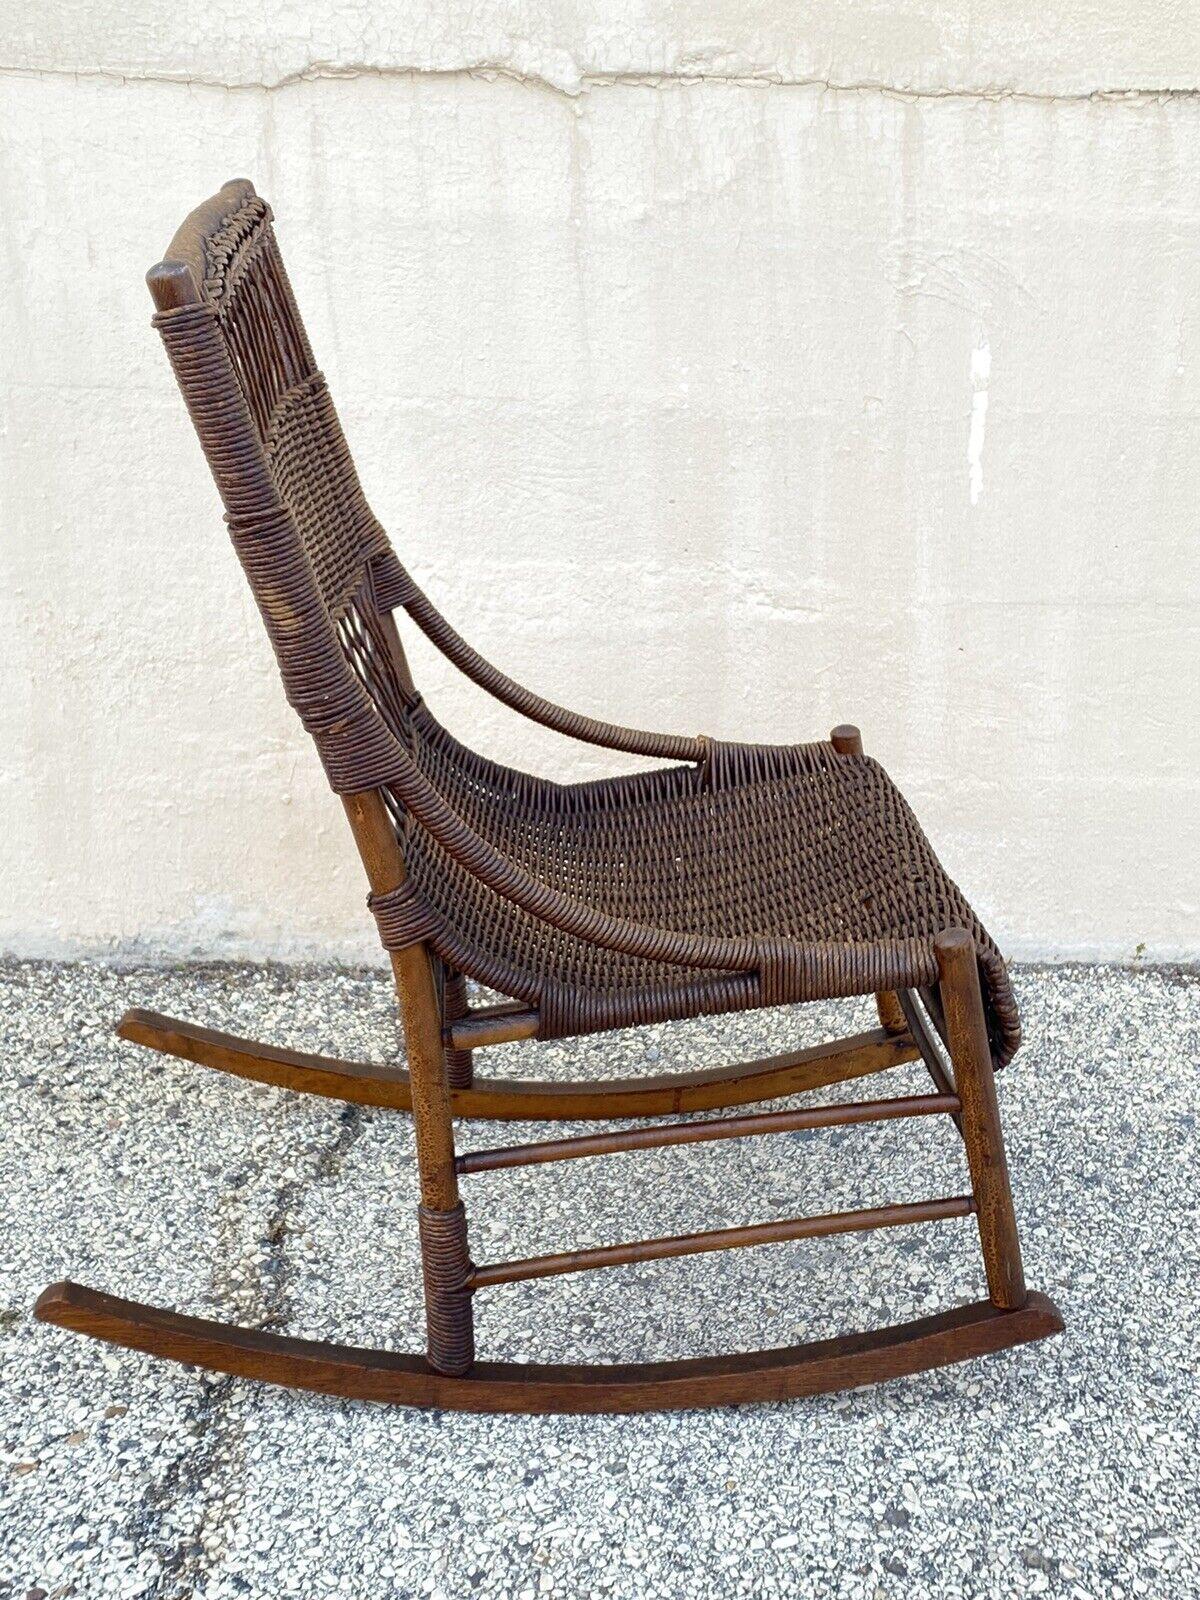 Antique Wicker and Rattan Wooden Victorian Rocking Chair Rocker For Sale 6